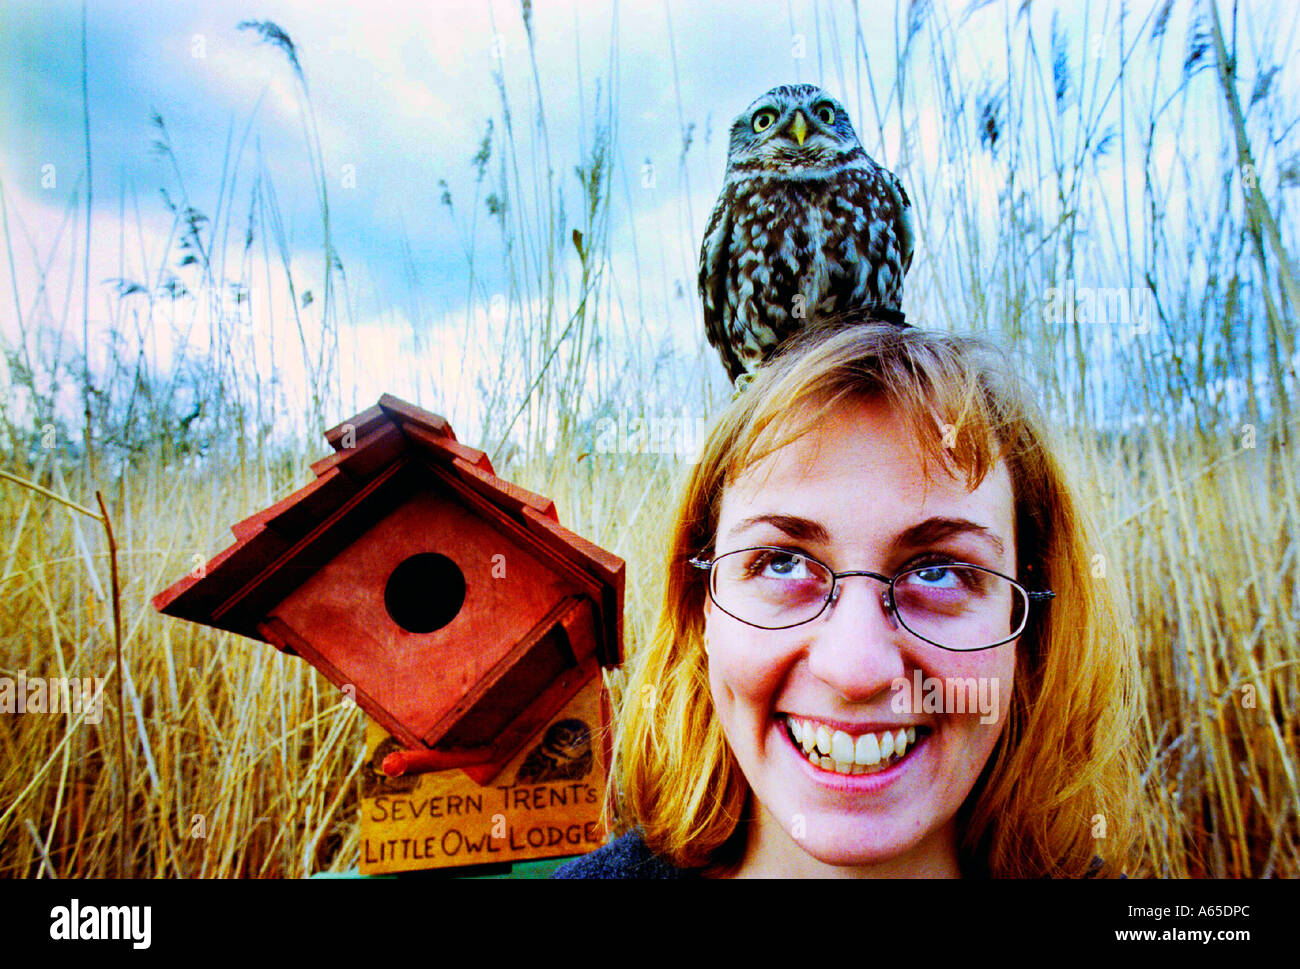 Rare Little Owl sitting on the head of  blonde lady scientist who is wearing glasses and a big smile Stock Photo